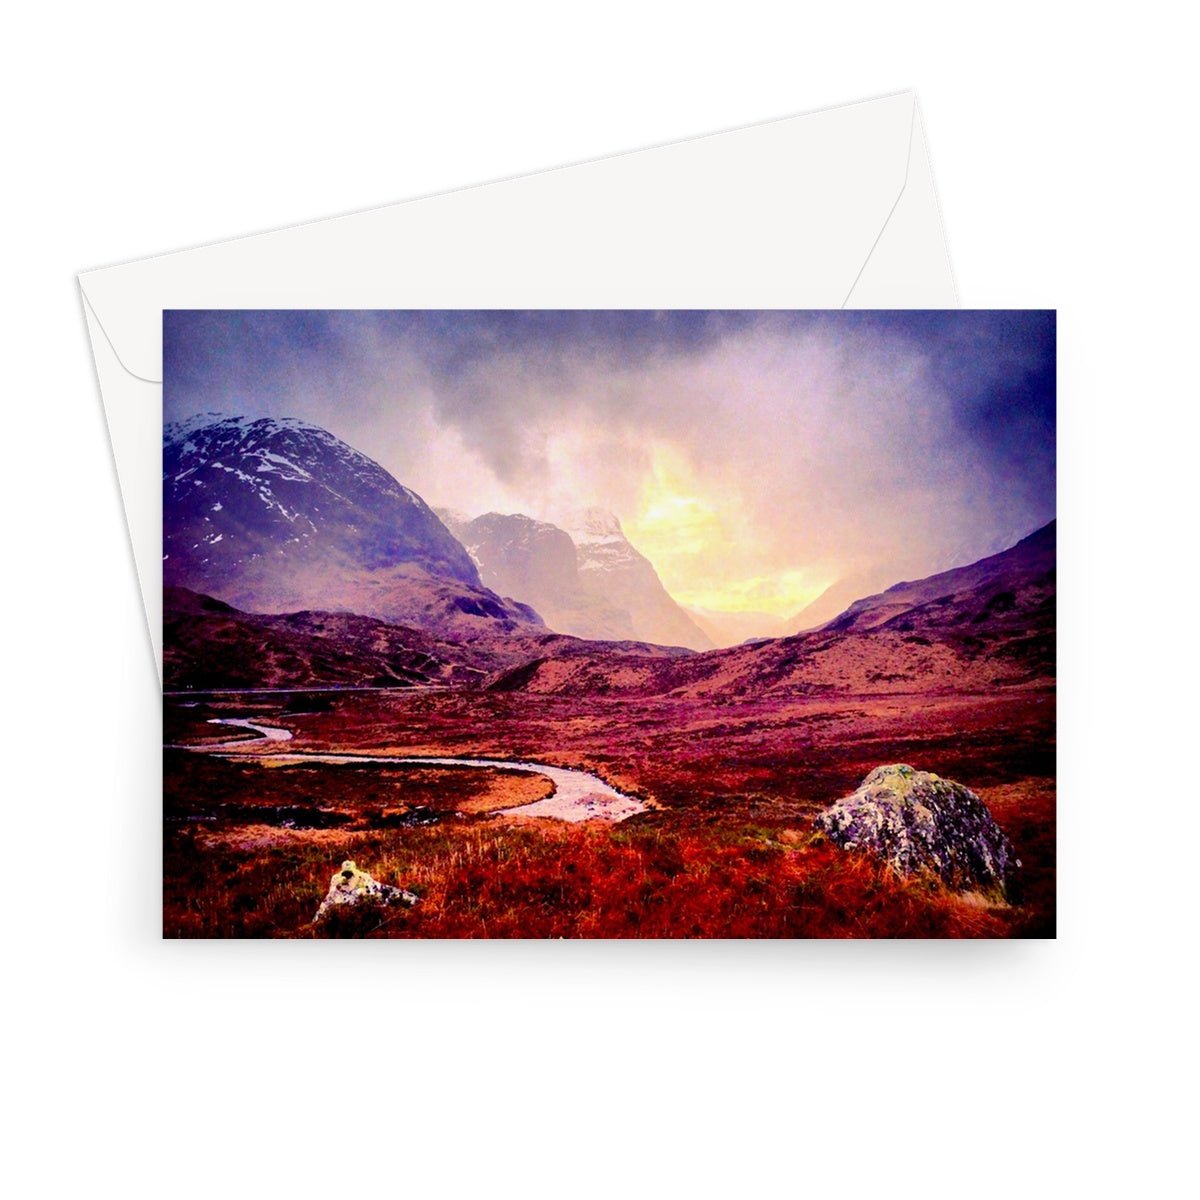 A Brooding Glencoe Art Gifts Greeting Card-Greetings Cards-Glencoe Art Gallery-7"x5"-1 Card-Paintings, Prints, Homeware, Art Gifts From Scotland By Scottish Artist Kevin Hunter